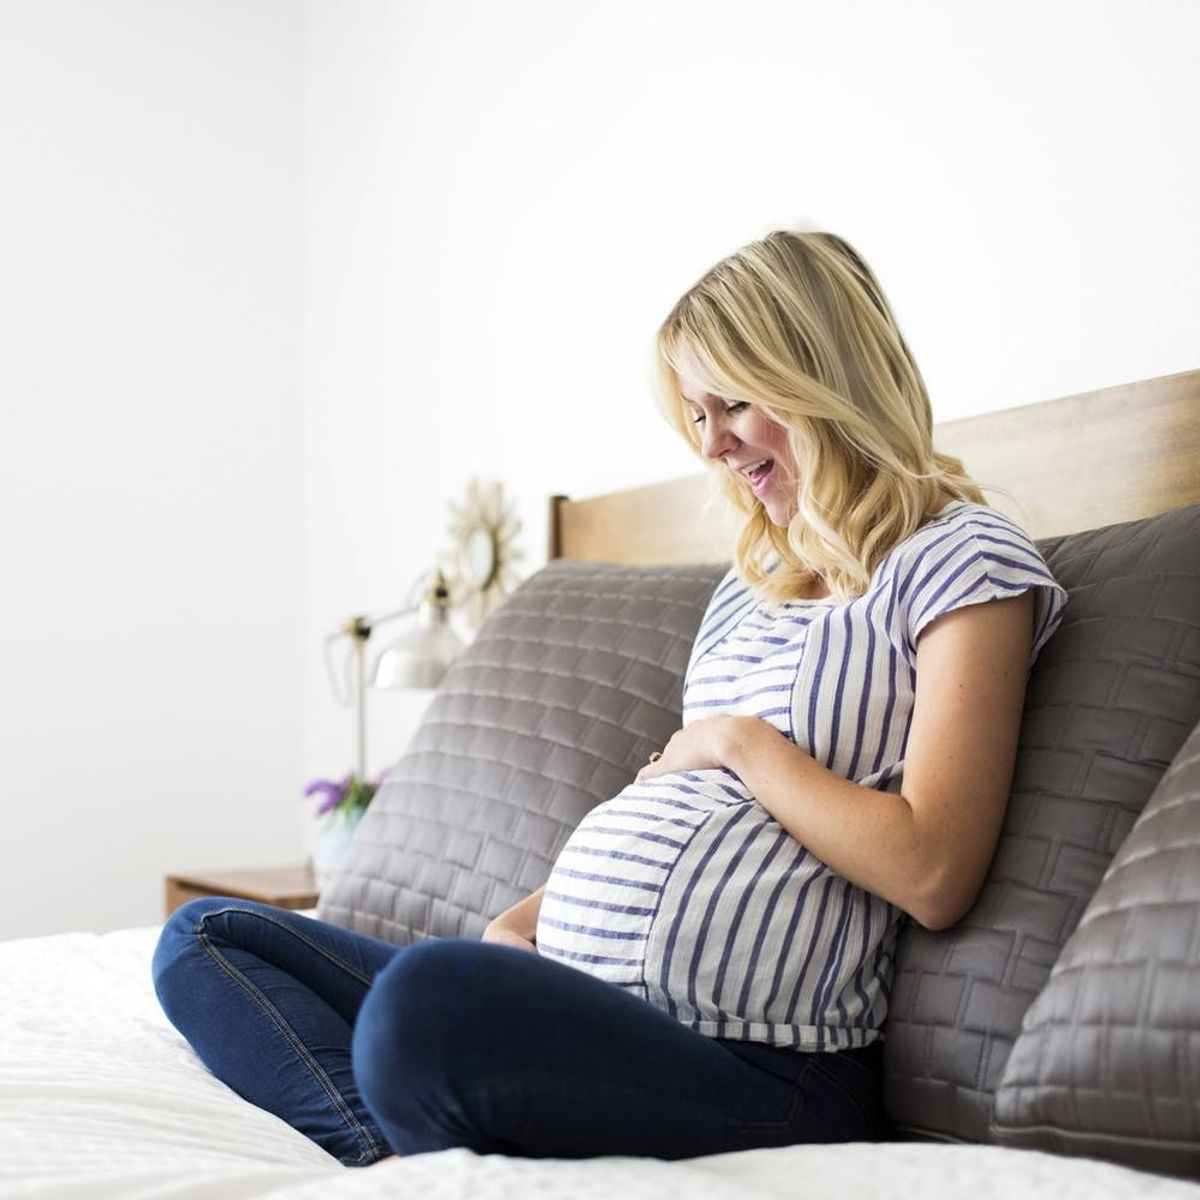 6 Surprising Ways Your Body Changes During the Third Trimester